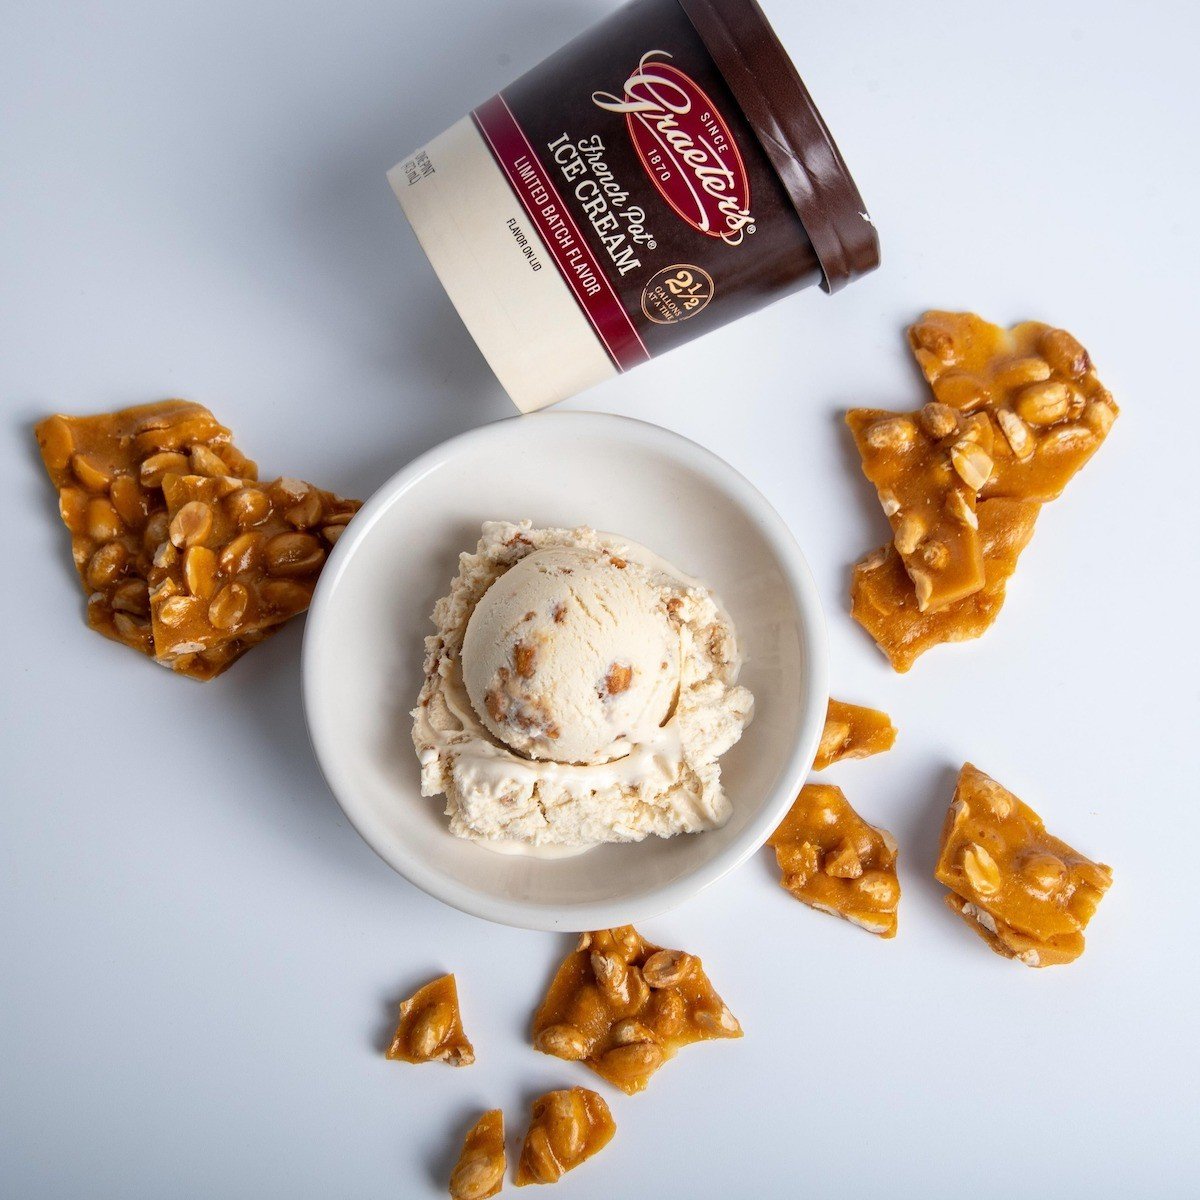 Graeter's new, limited-time flavor, Peanut Brittle